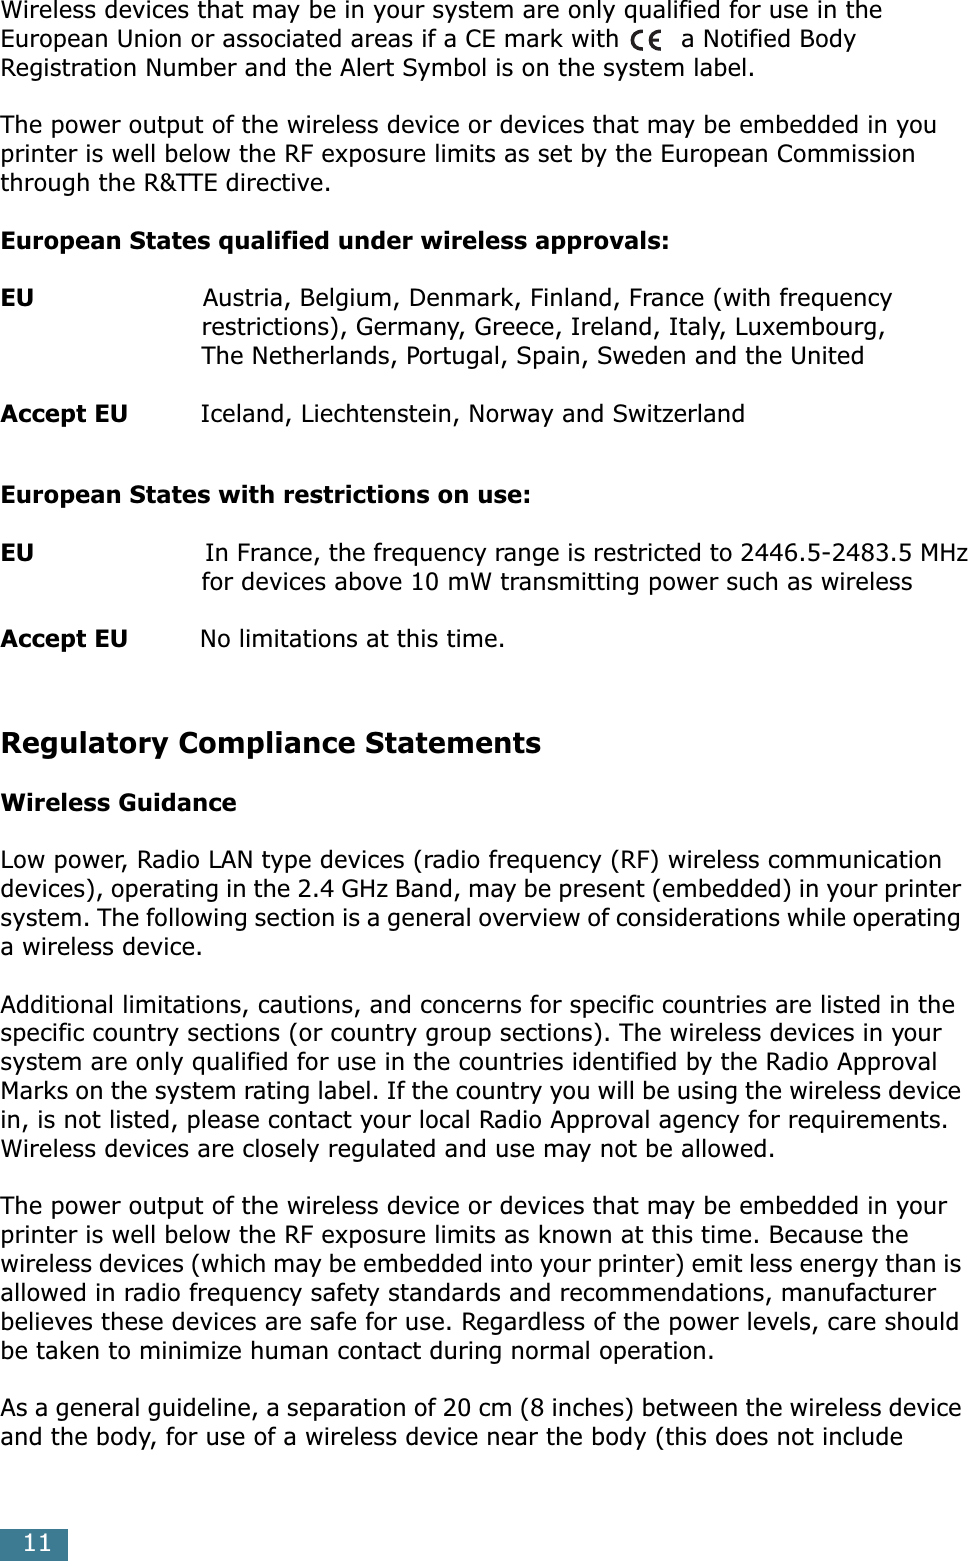  11 Wireless devices that may be in your system are only qualified for use in the European Union or associated areas if a CE mark with  a Notified Body Registration Number and the Alert Symbol is on the system label.The power output of the wireless device or devices that may be embedded in you printer is well below the RF exposure limits as set by the European Commission through the R&amp;TTE directive. European States qualified under wireless approvals:EU                      Austria, Belgium, Denmark, Finland, France (with frequency                         restrictions), Germany, Greece, Ireland, Italy, Luxembourg,                          The Netherlands, Portugal, Spain, Sweden and the United Accept EU          Iceland, Liechtenstein, Norway and Switzerland European States with restrictions on use:EU                        In France, the frequency range is restricted to 2446.5-2483.5 MHz                         for devices above 10 mW transmitting power such as wireless Accept EU          No limitations at this time. Regulatory Compliance Statements Wireless Guidance Low power, Radio LAN type devices (radio frequency (RF) wireless communication devices), operating in the 2.4 GHz Band, may be present (embedded) in your printer system. The following section is a general overview of considerations while operating a wireless device.Additional limitations, cautions, and concerns for specific countries are listed in the specific country sections (or country group sections). The wireless devices in your system are only qualified for use in the countries identified by the Radio Approval Marks on the system rating label. If the country you will be using the wireless device in, is not listed, please contact your local Radio Approval agency for requirements. Wireless devices are closely regulated and use may not be allowed.The power output of the wireless device or devices that may be embedded in your printer is well below the RF exposure limits as known at this time. Because the wireless devices (which may be embedded into your printer) emit less energy than is allowed in radio frequency safety standards and recommendations, manufacturer believes these devices are safe for use. Regardless of the power levels, care should be taken to minimize human contact during normal operation.As a general guideline, a separation of 20 cm (8 inches) between the wireless device and the body, for use of a wireless device near the body (this does not include 